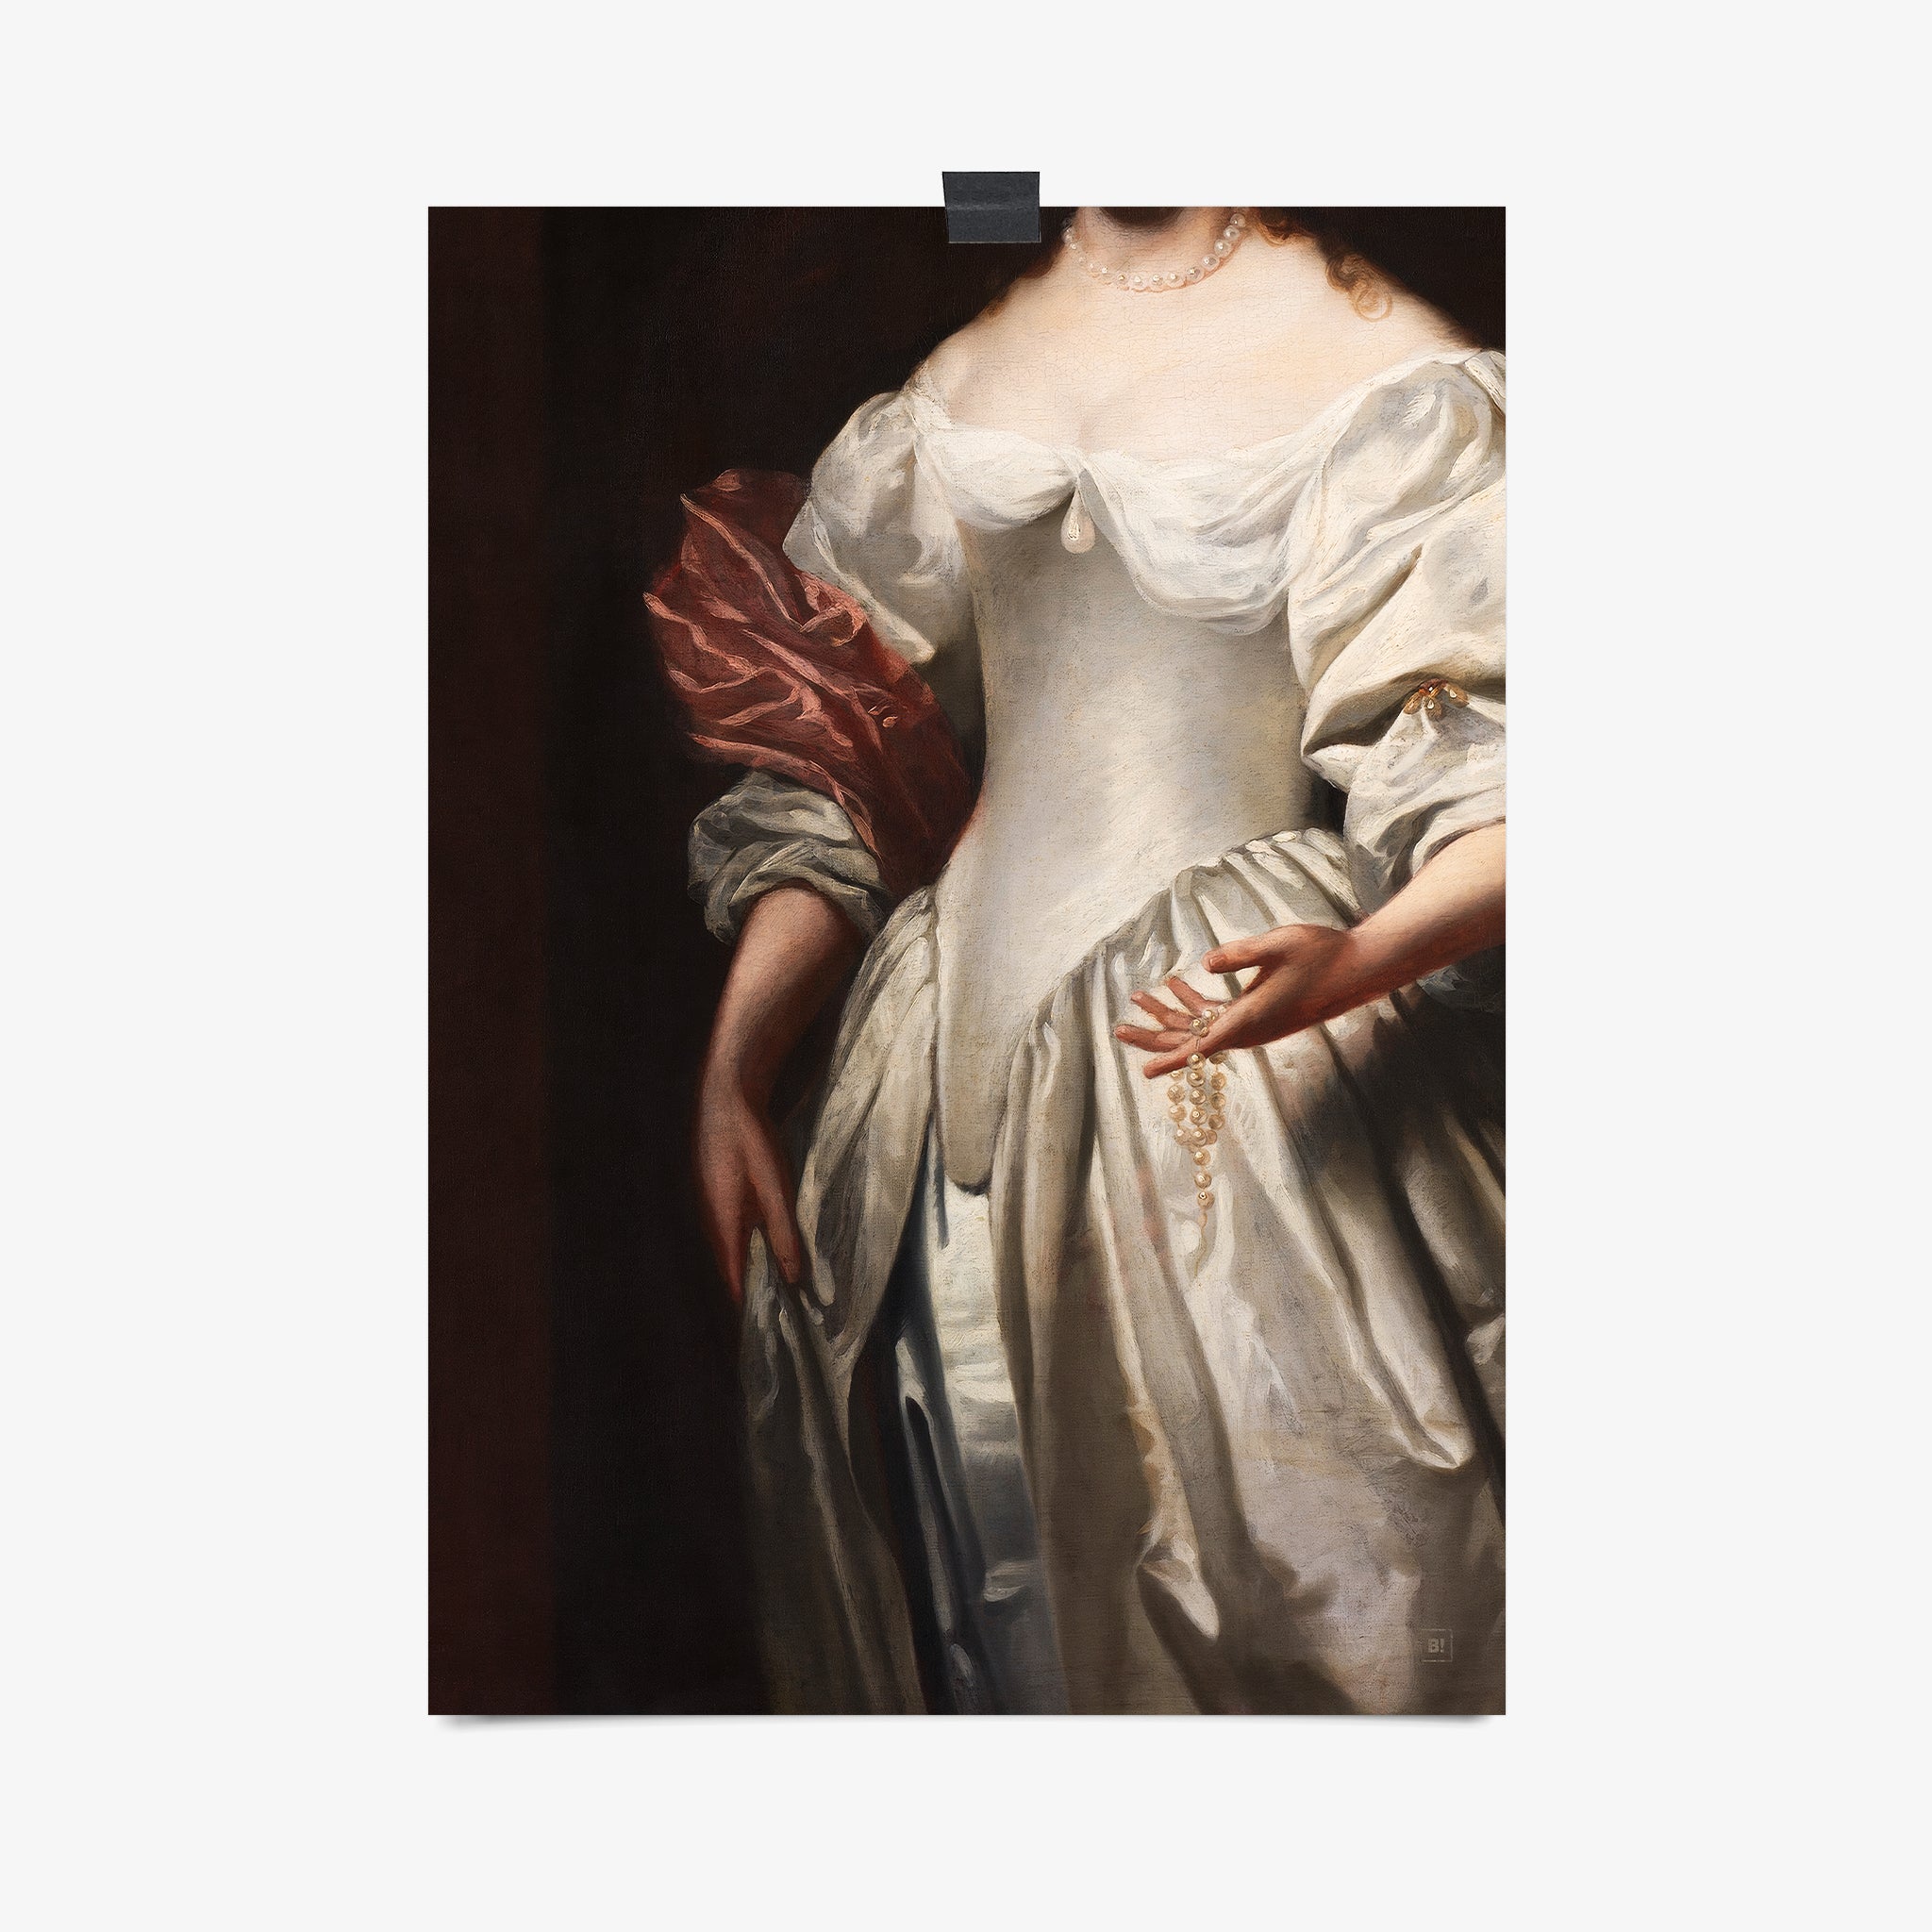 Be inspired by our altered Victorian Woman in White Satin Dress art print. This artwork was printed using the giclée process on archival acid-free paper that captures its timeless beauty in every detail.